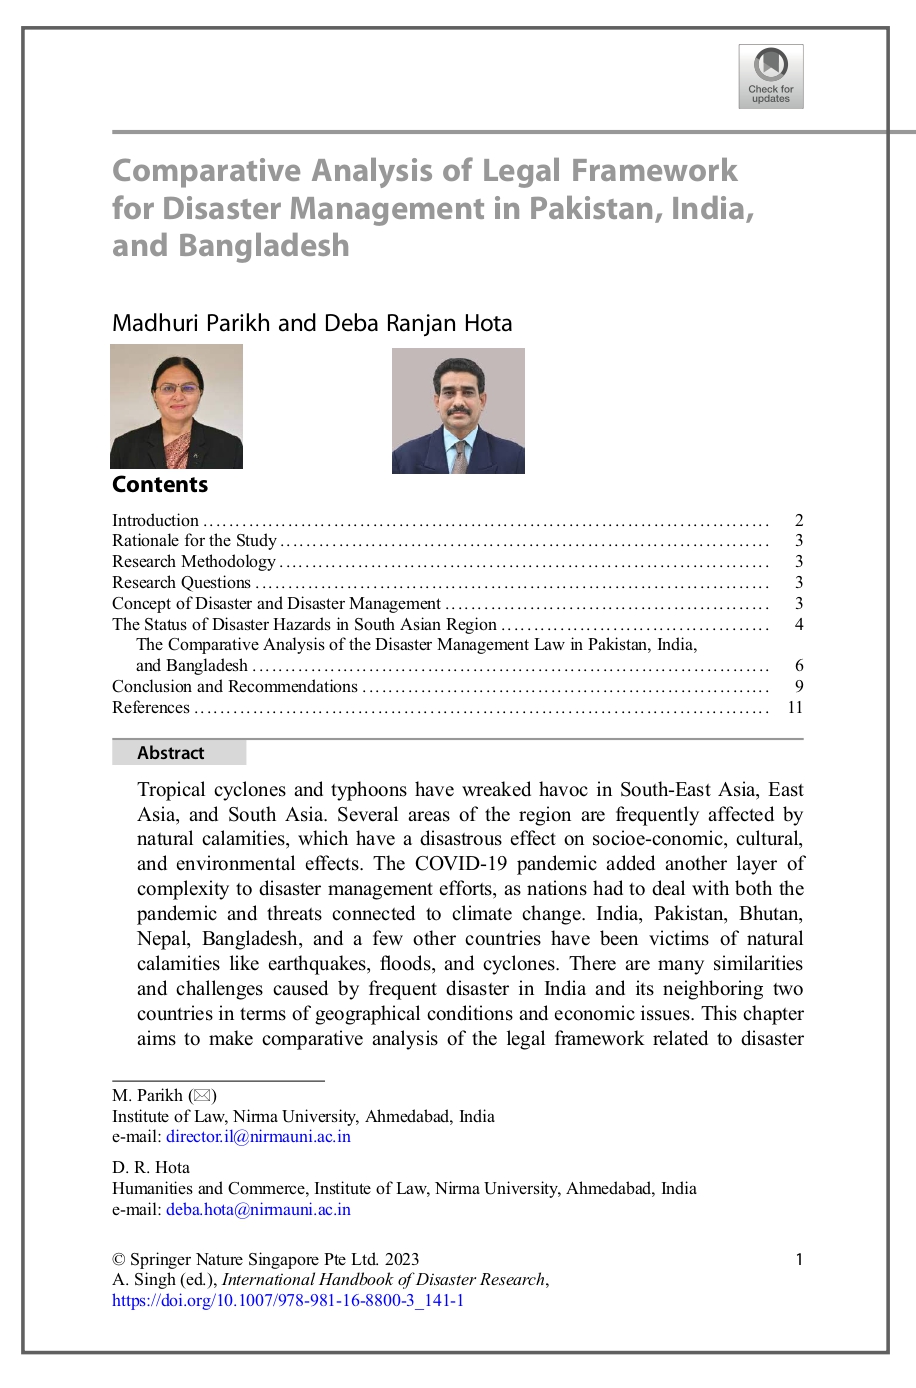 Comparative Analysis of Legal Framework for Disaster Management in Pakistan, India, and Bangladesh